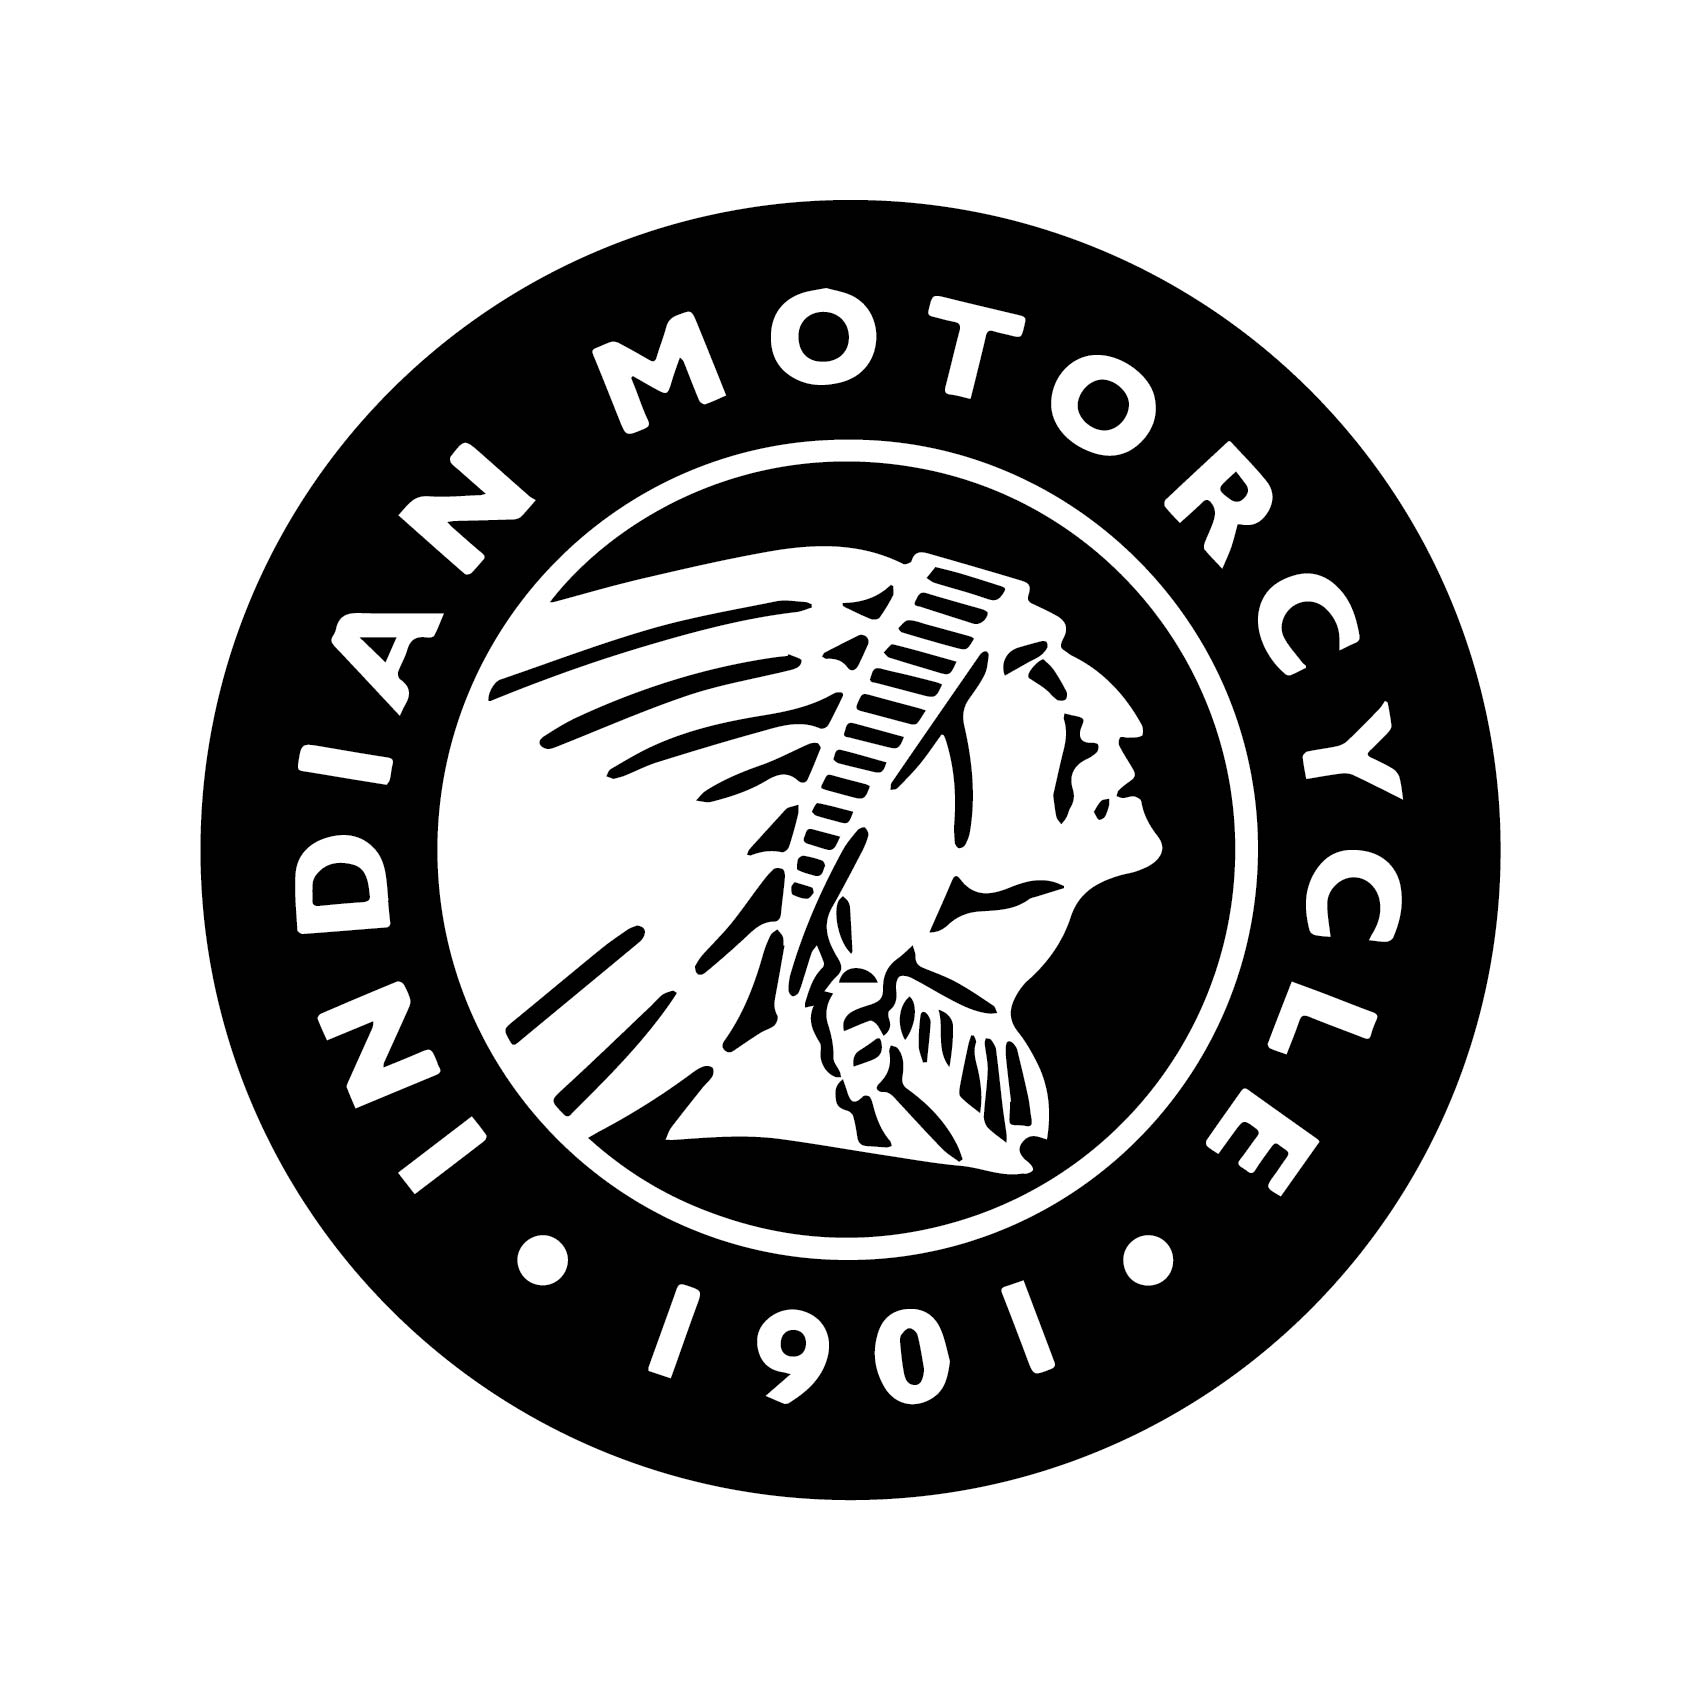 stickers-logo-indian-motorcycle-ref10indianmoto-autocollant-indian-motorcycle-moto-sticker-pour-moto